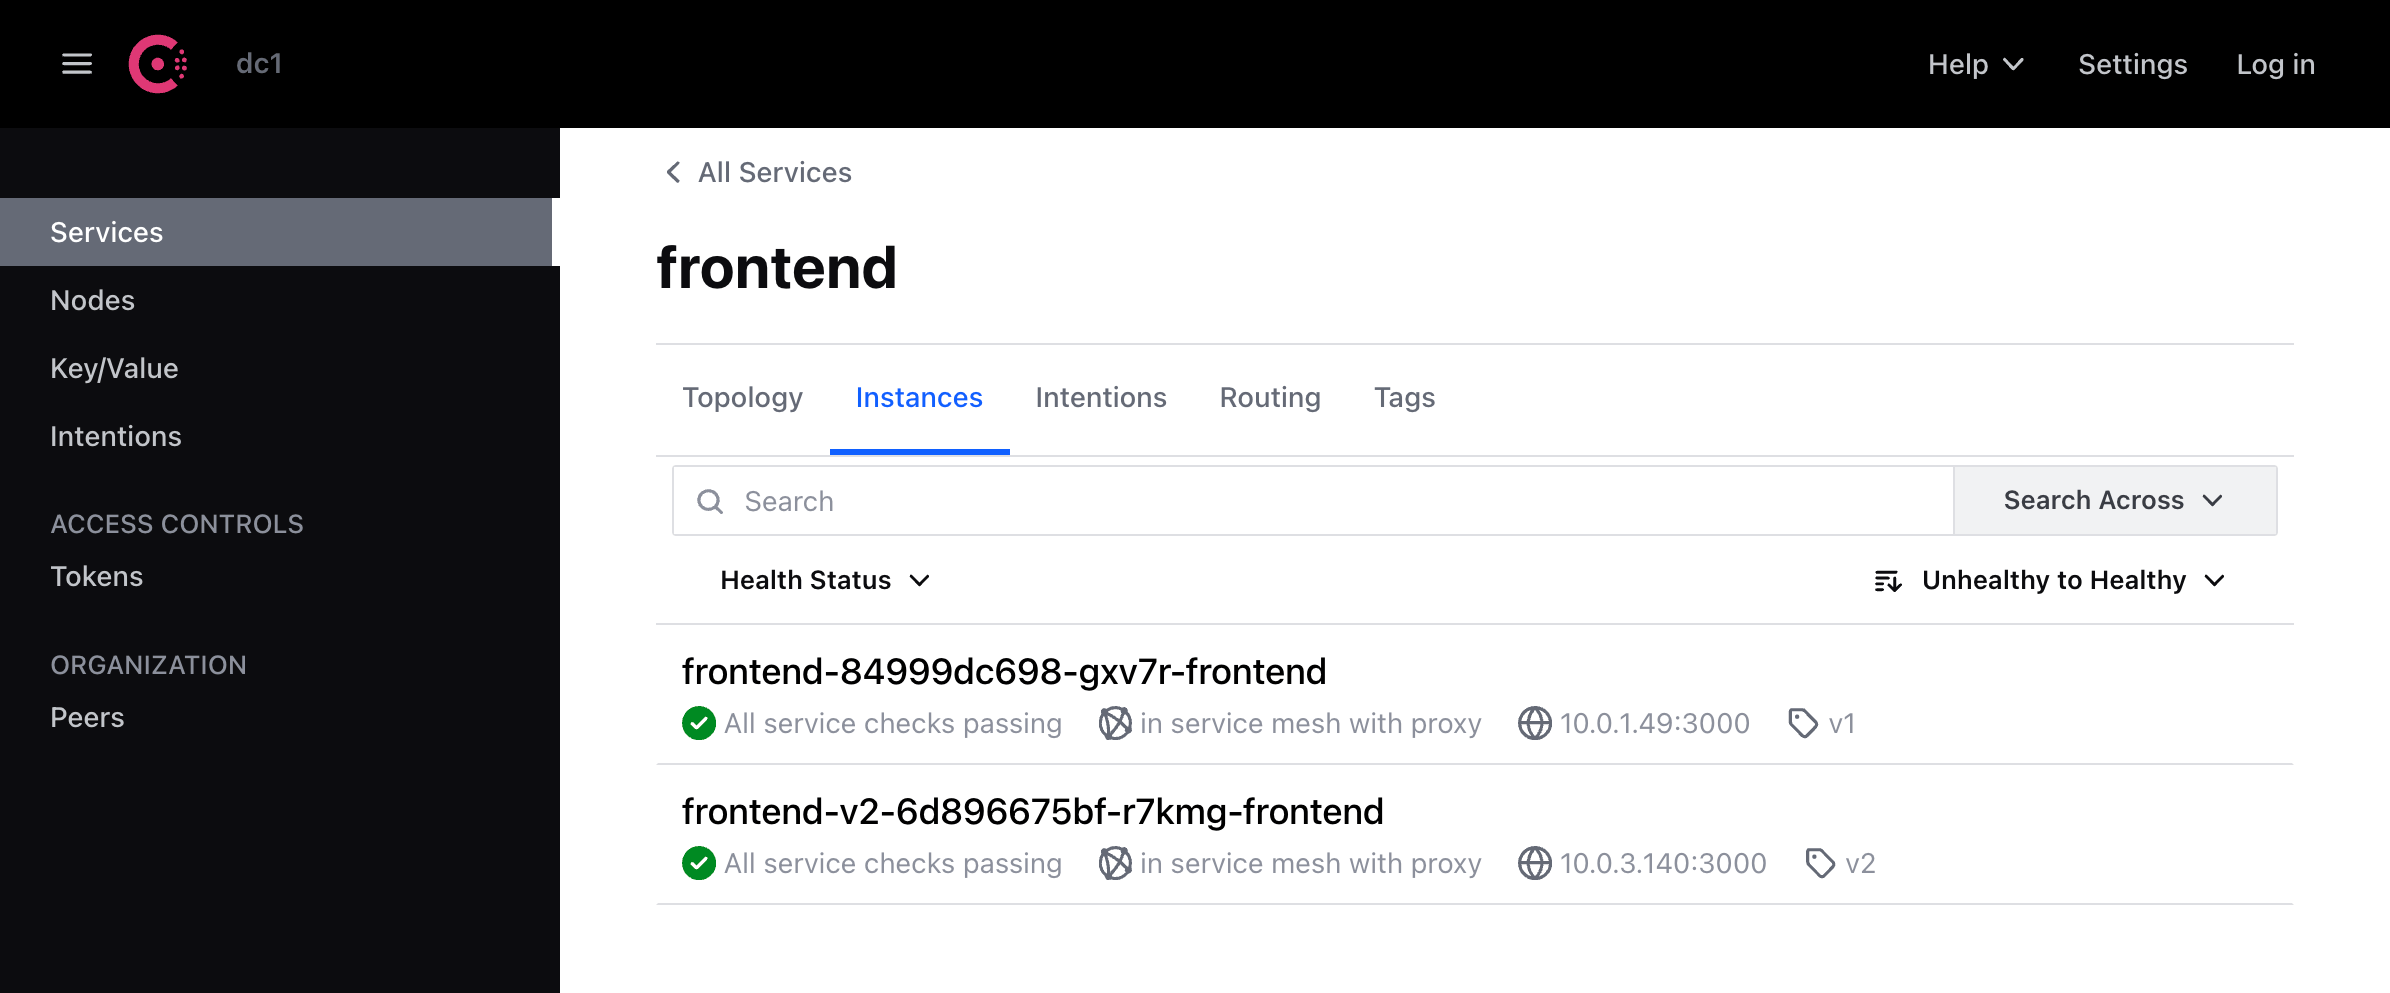 There are two instances of the `frontend` service, each one is tagged with a different tag (`v1` and `v2`) respectively.